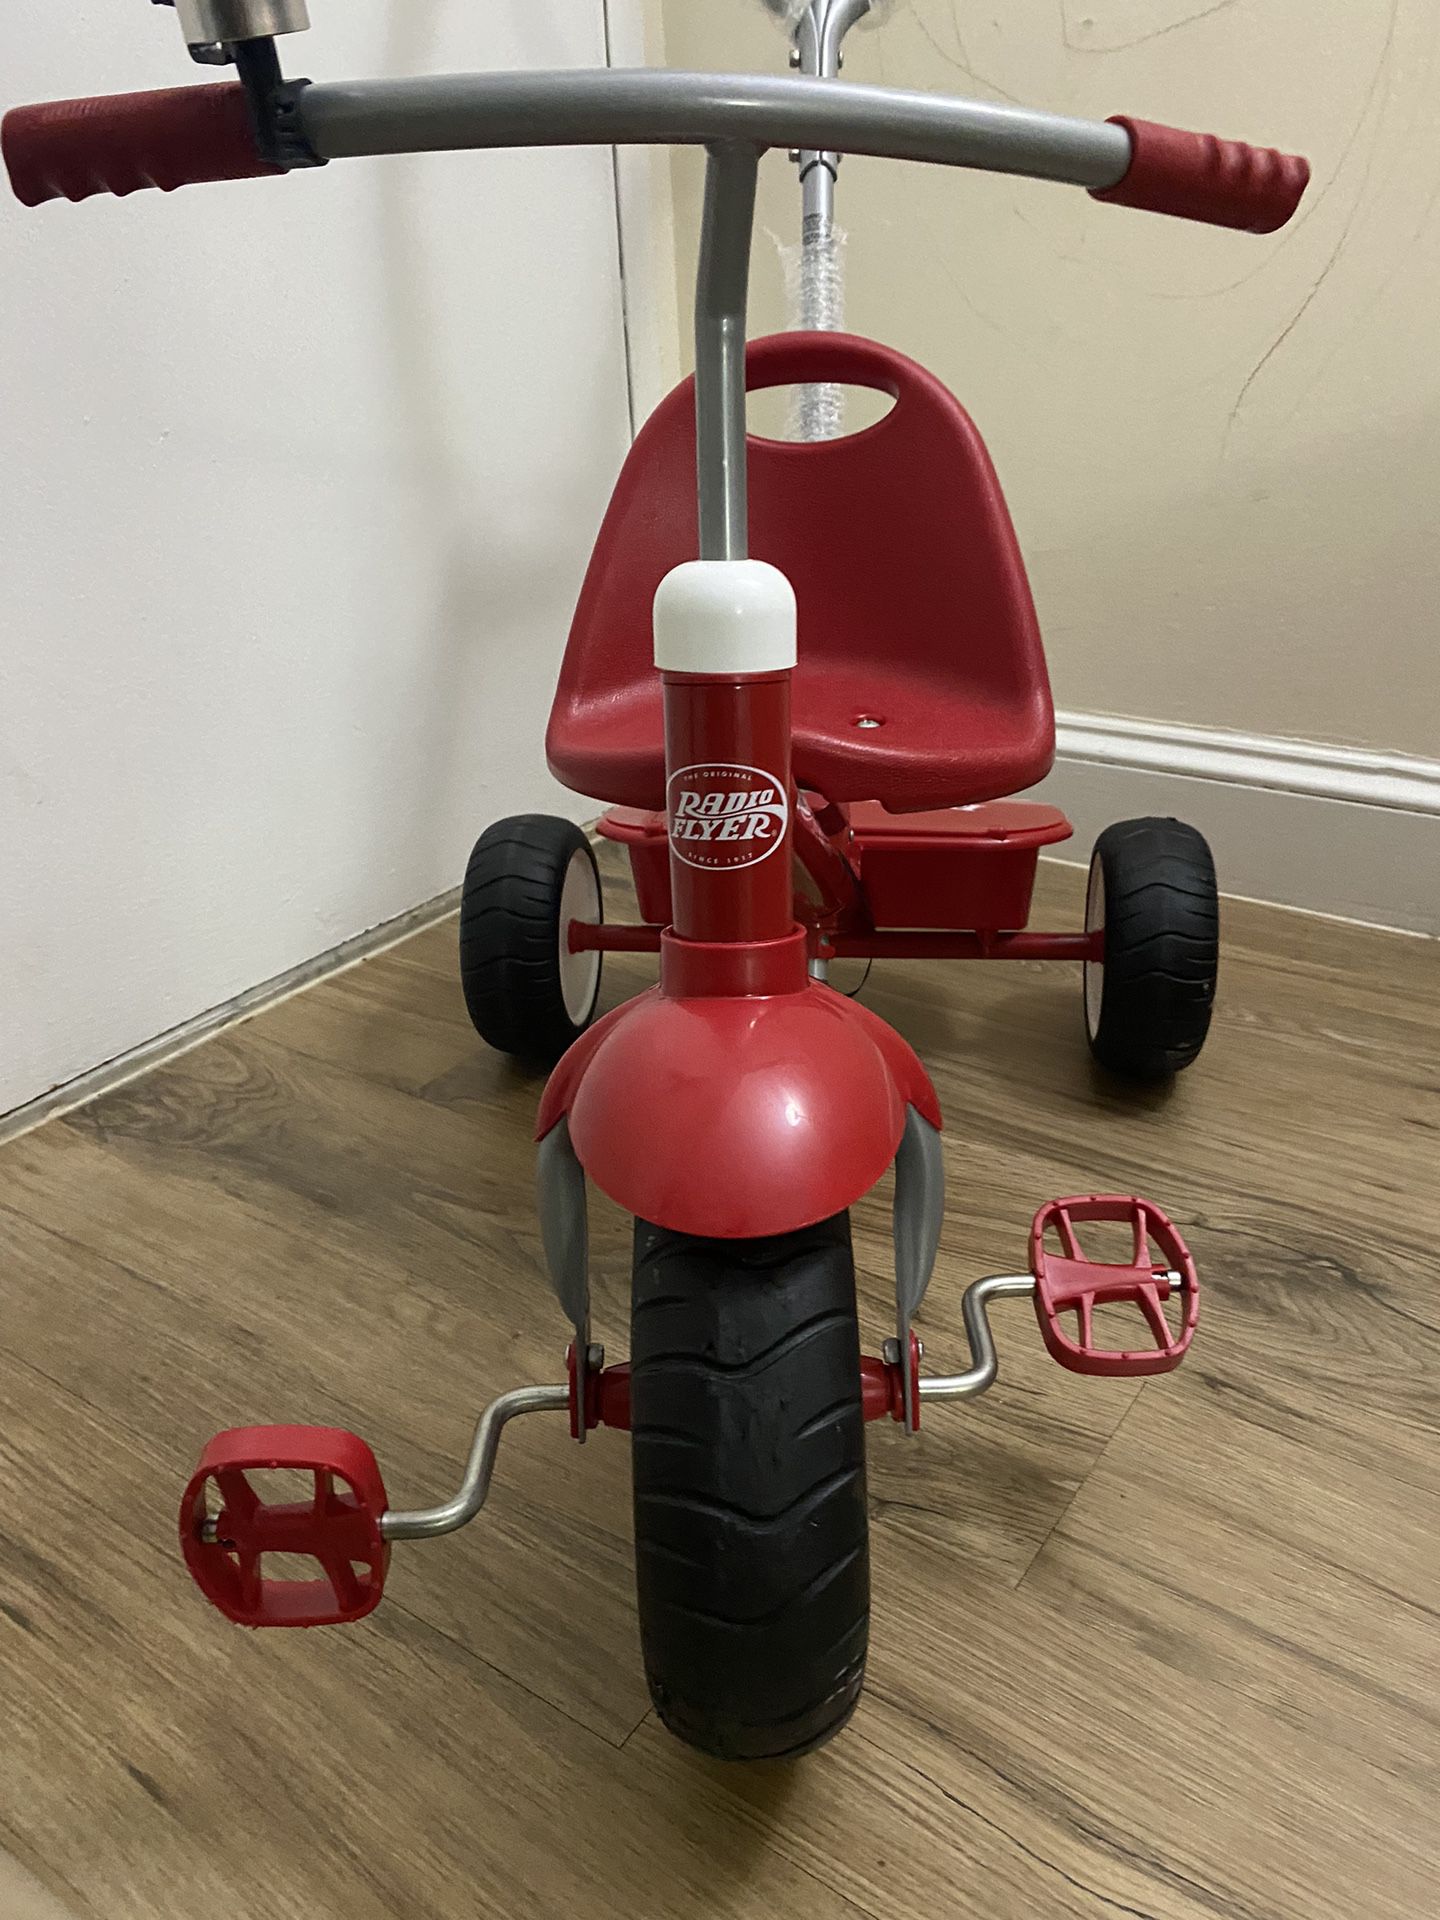 Radio Flyer Deluxe Steer & Stroll Ride-On Trike, Tricycle For Toddlers Age 2-5, Toddler Bike, Red